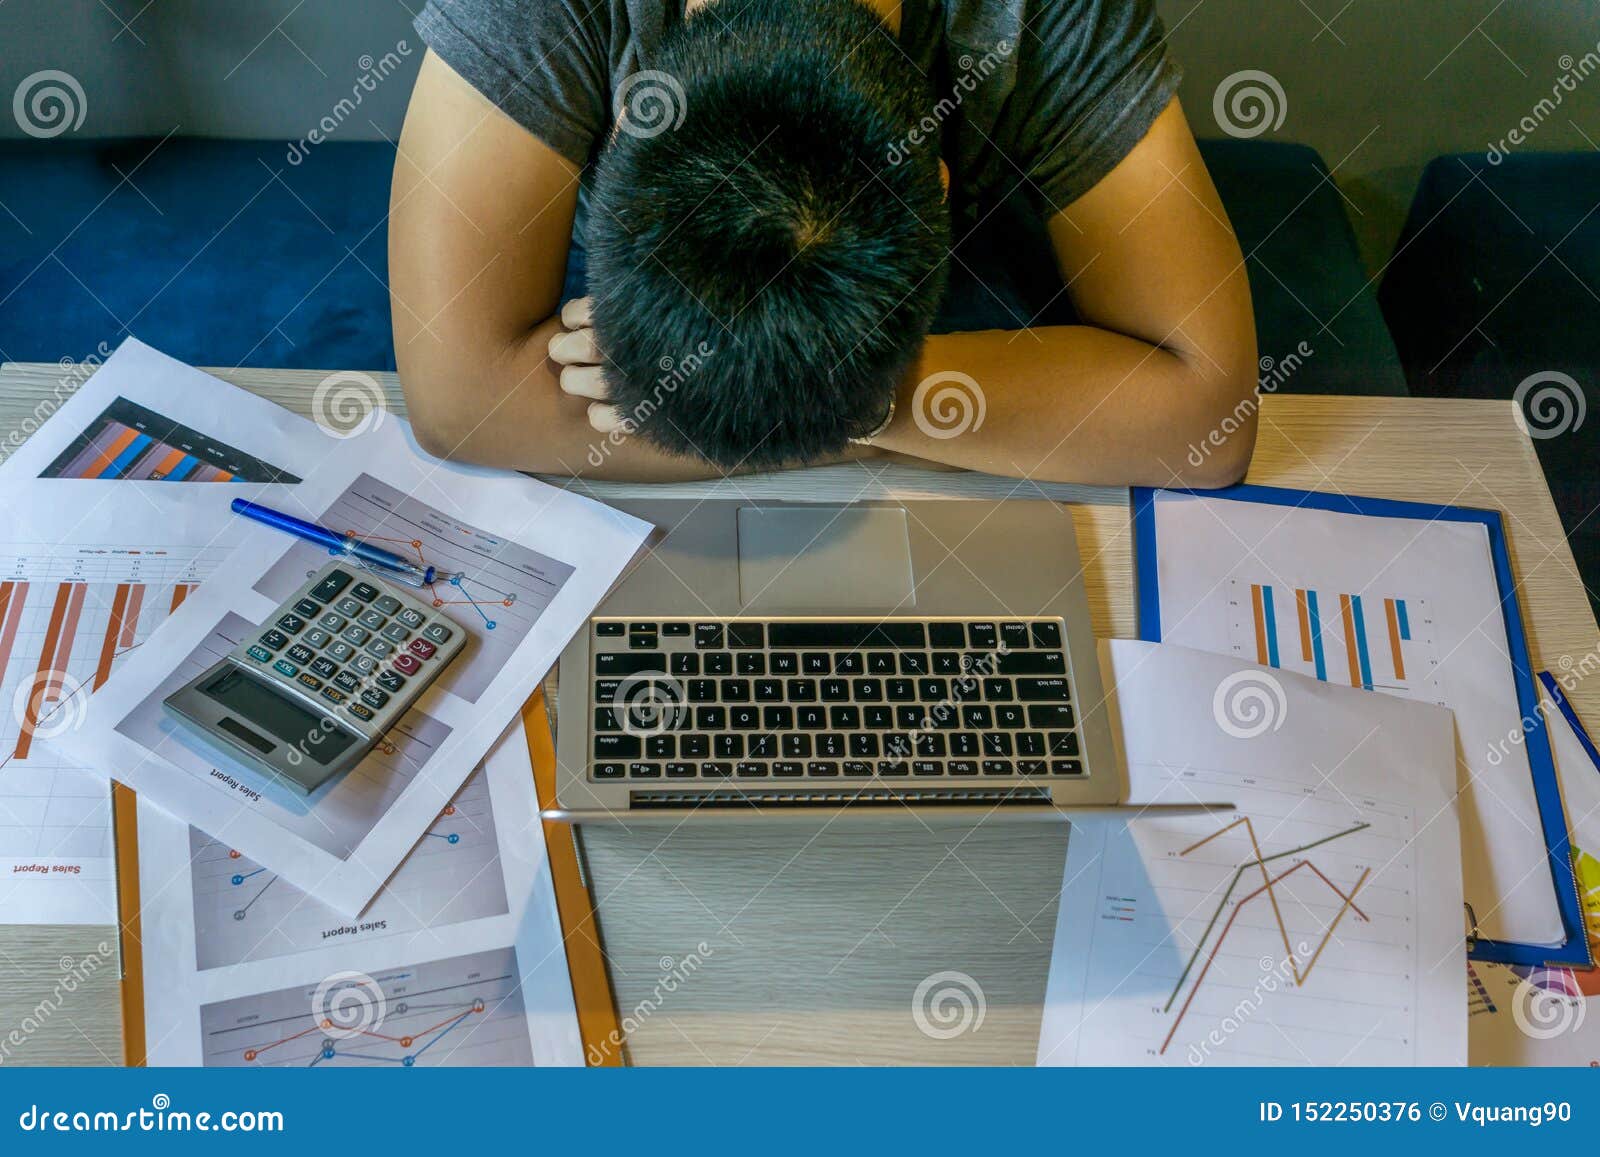 Exhausted Millennial Fall Asleep On Desk With Laptop Unorganized